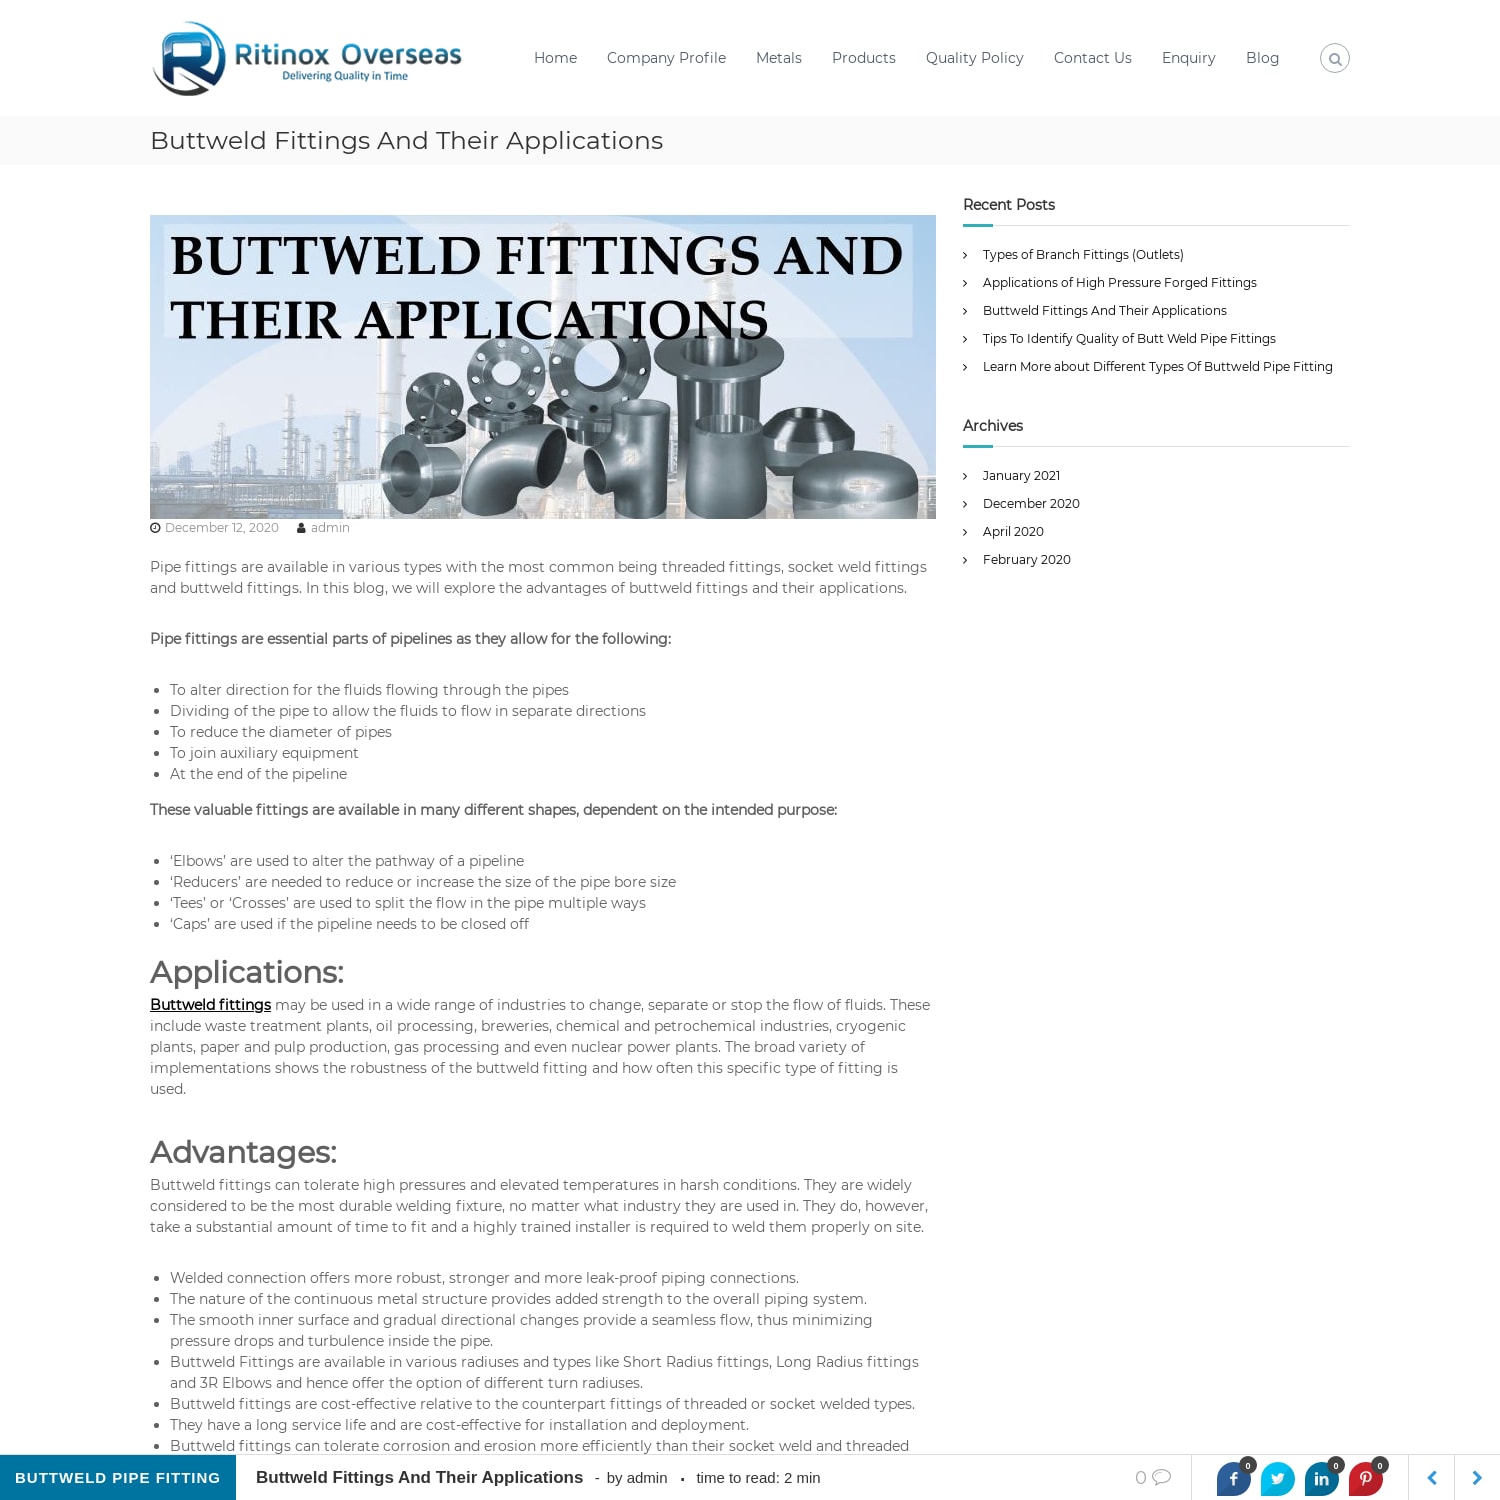 Buttweld Fittings And Their Applications - Ritinox overseas Blog